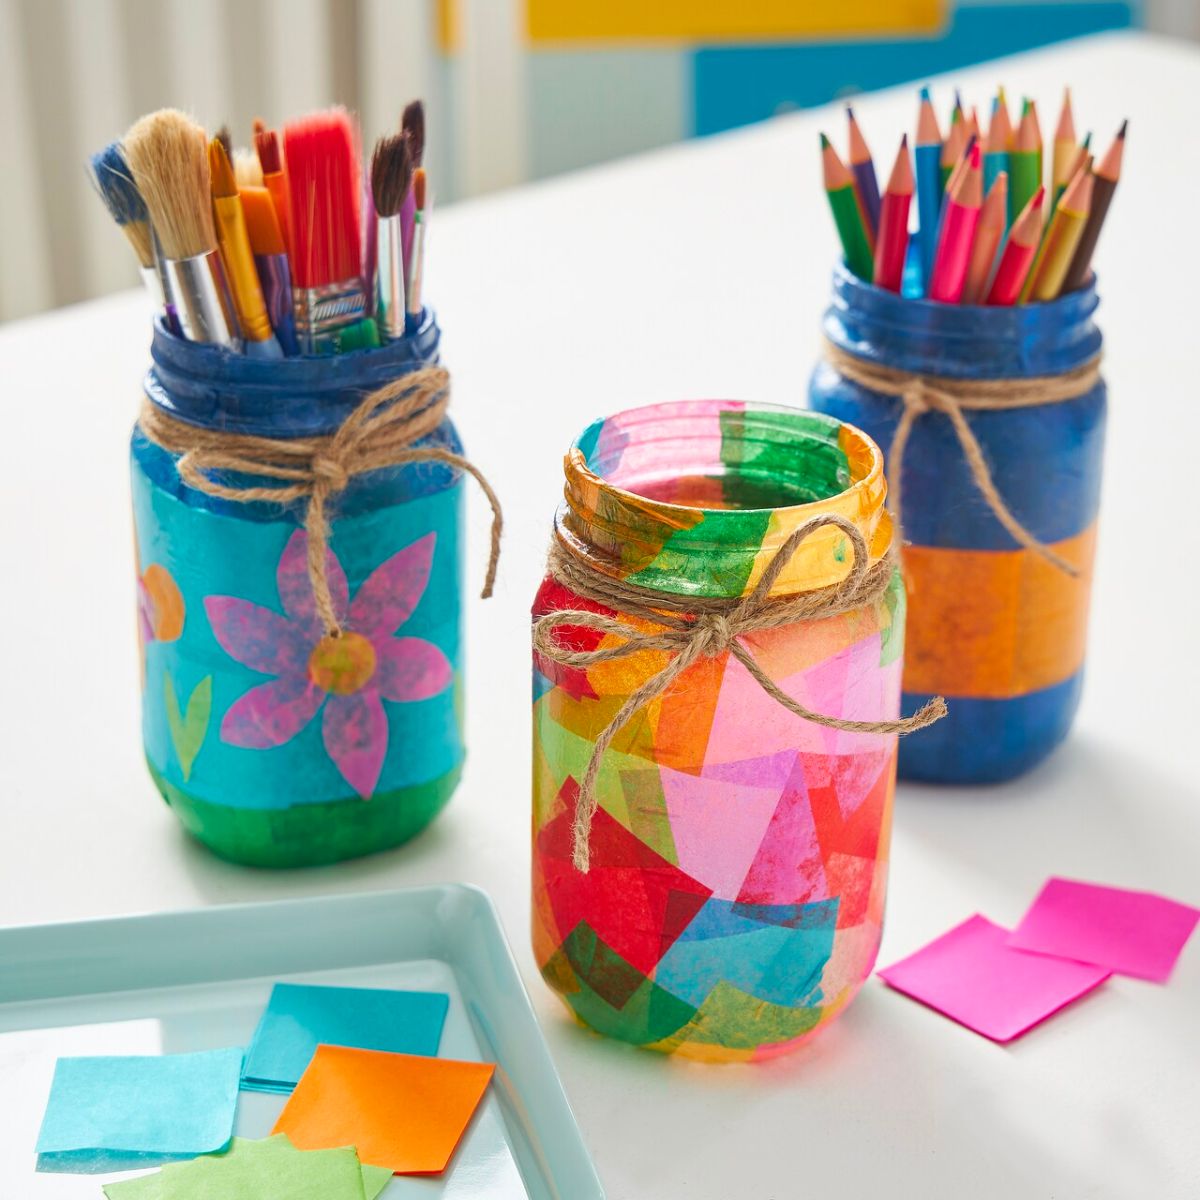 examples of the Organization Jars kids can make at michaels sunday make break january 14th